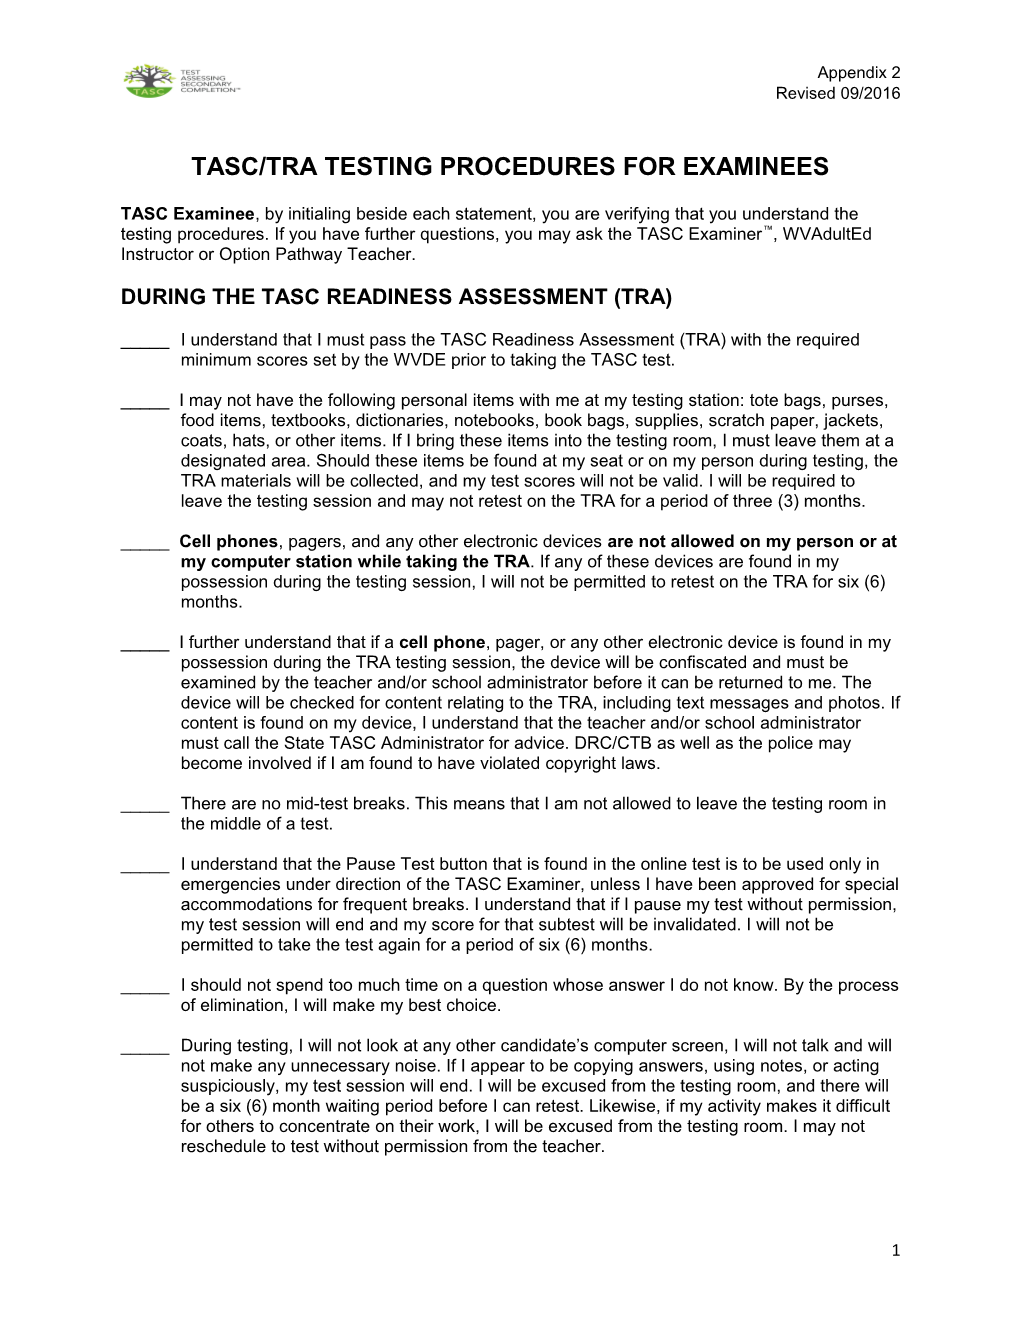 Tasc/TRA Testing Procedures for Examinees